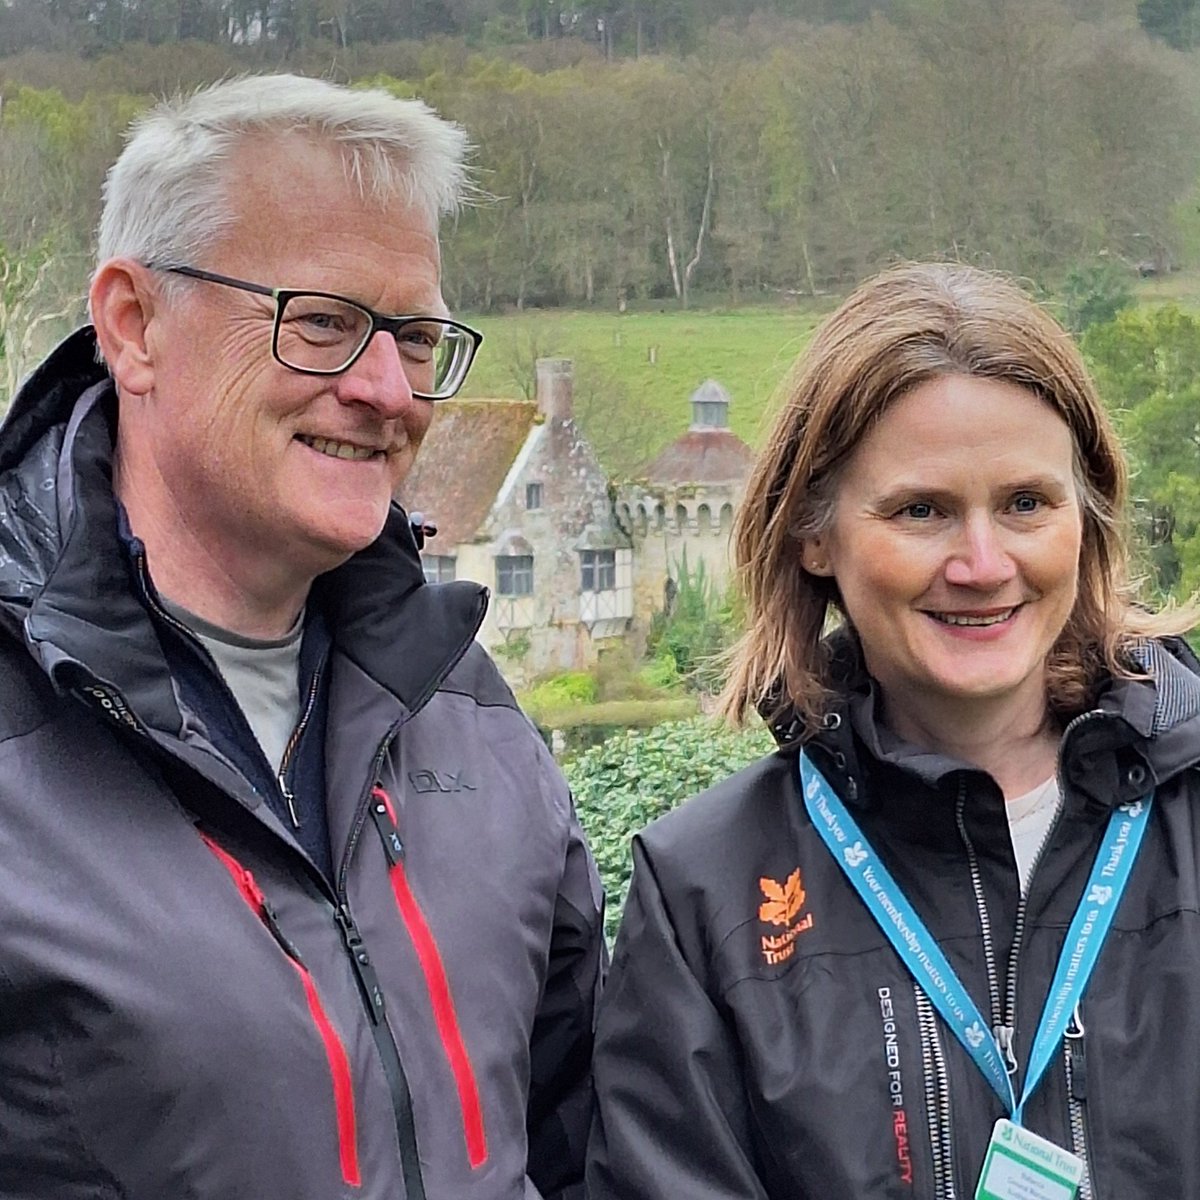 Lovely to welcome Rob Smith to Scotney today to record interviews for podcast 'Talk on the Wild Side'. Can't wait to hear the full programme later this month. #nature #conservationgrazing #sssi #scotneycastle #kwt #conservation #environment @southeastNT @KentWildlife